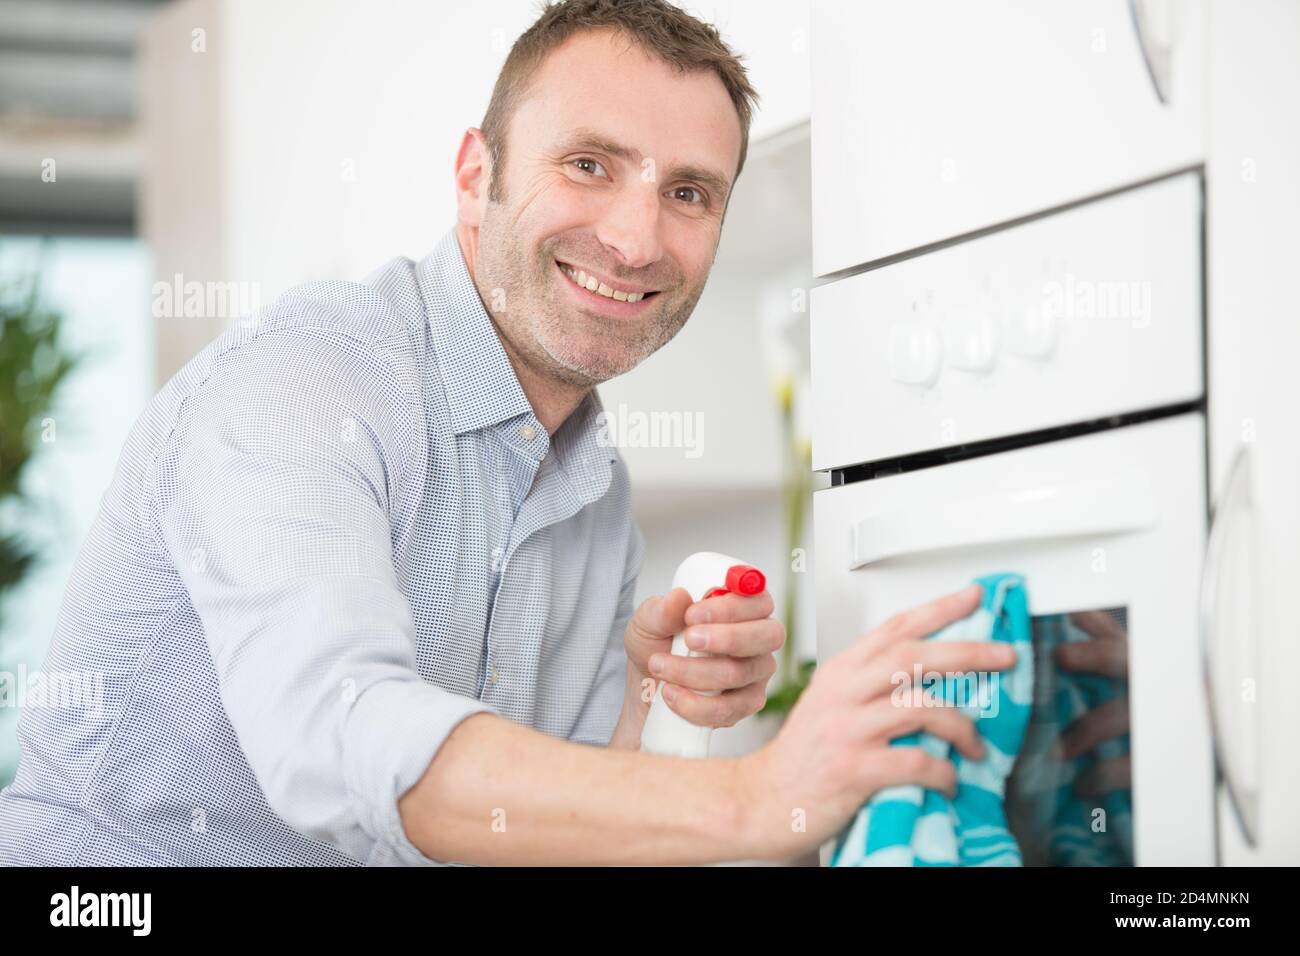 a man is cleaning oven Stock Photo